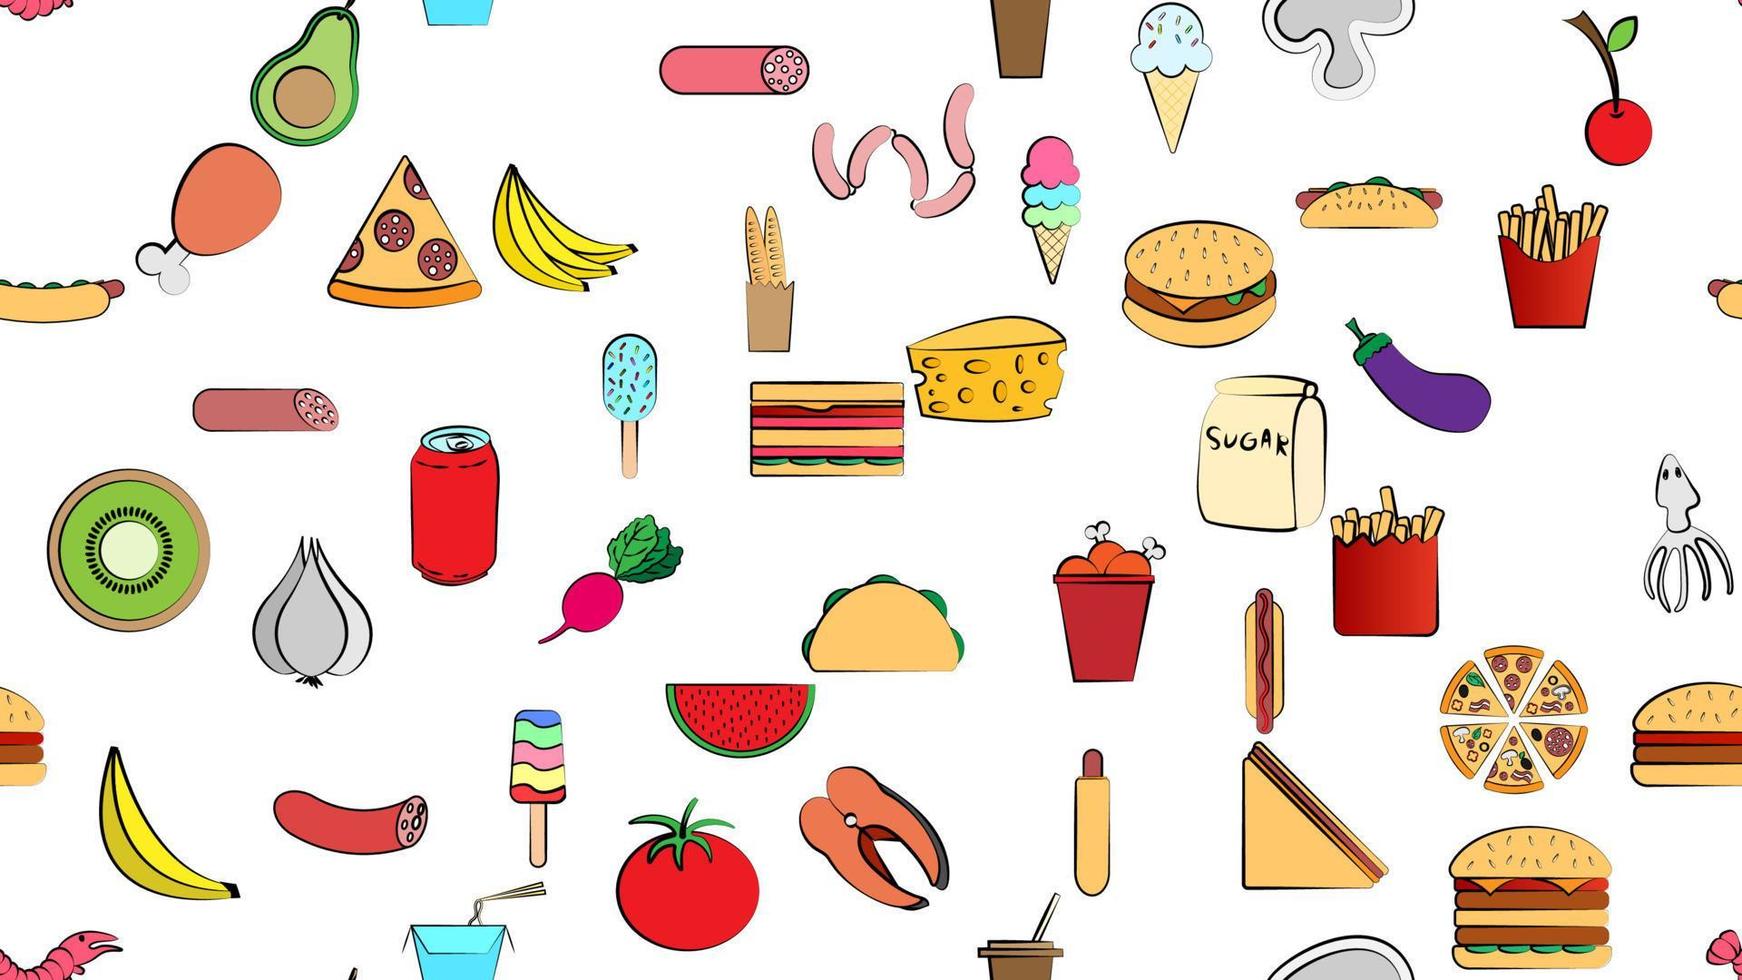 Endless white seamless pattern of delicious food and snack items icons set for restaurant bar cafe fast food, cheat meat, burger, pizza, hot dog, sandwich, fruits, vegetables. The background vector